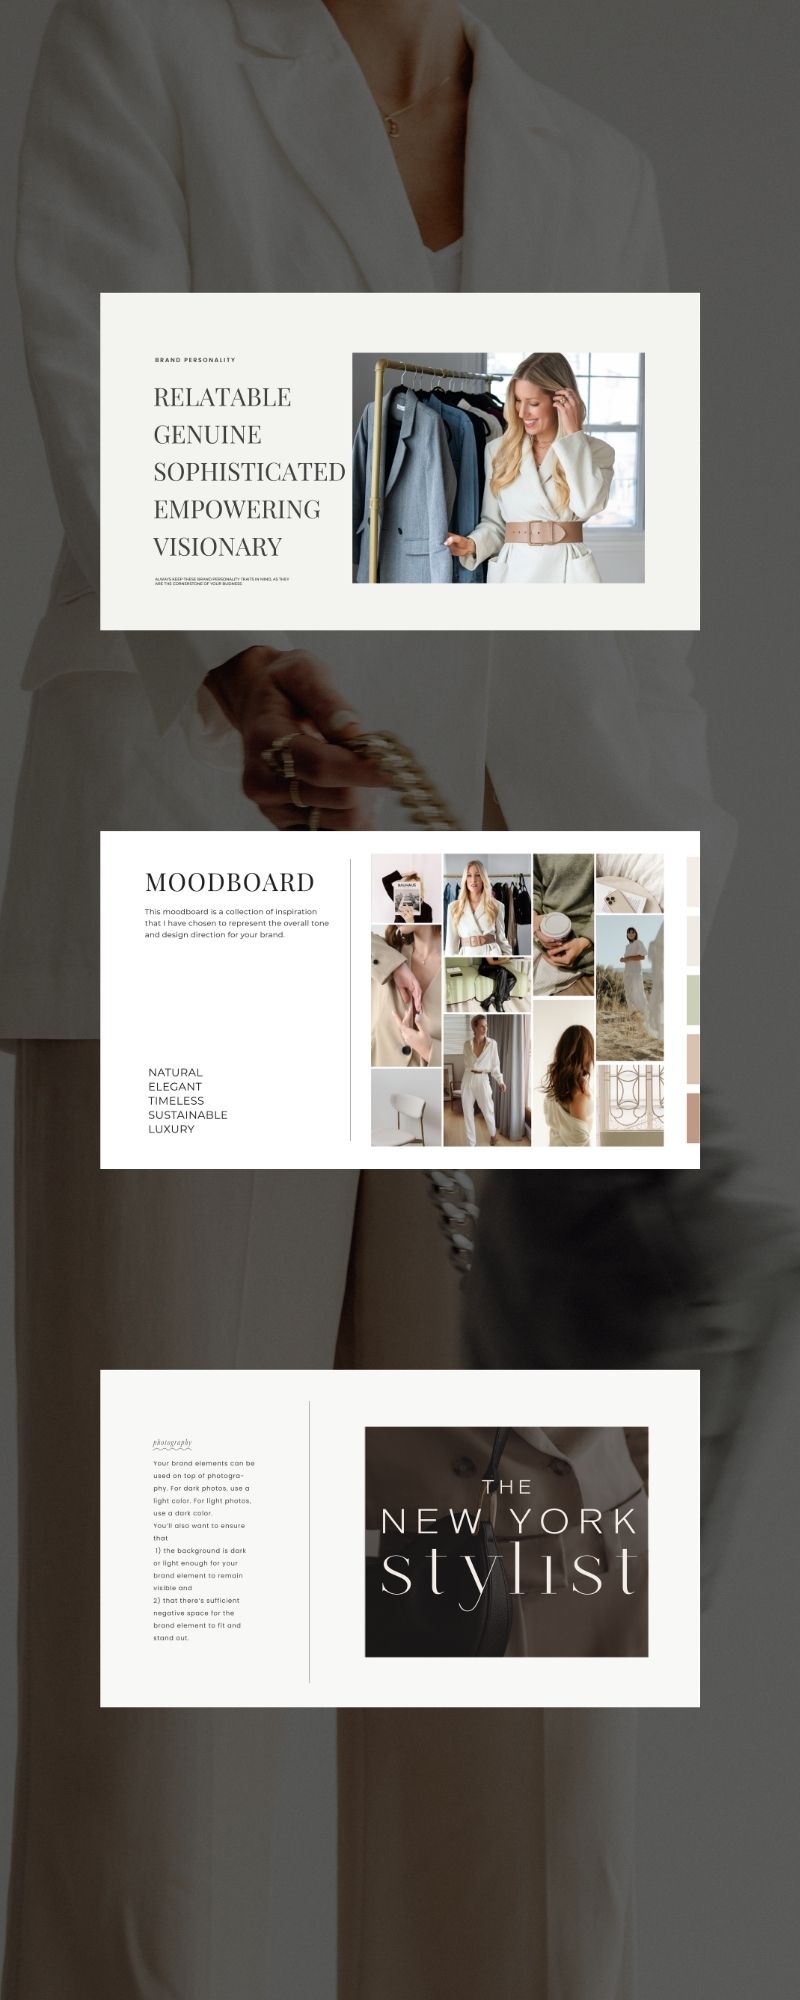 Internal brand design pages showing the strategy for The New York Stylist